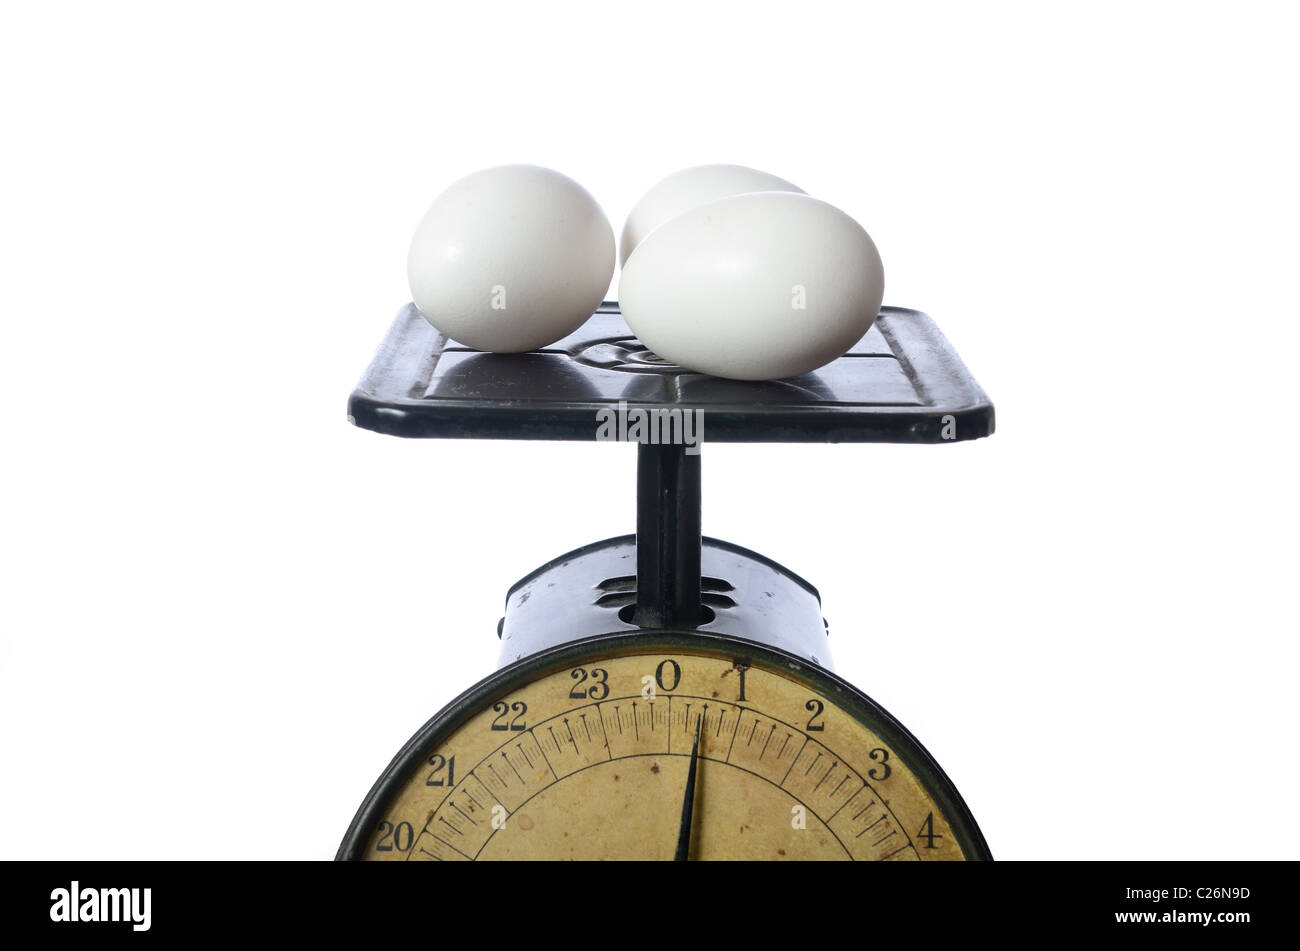 Eggs being weighed on an antique scale. Stock Photo